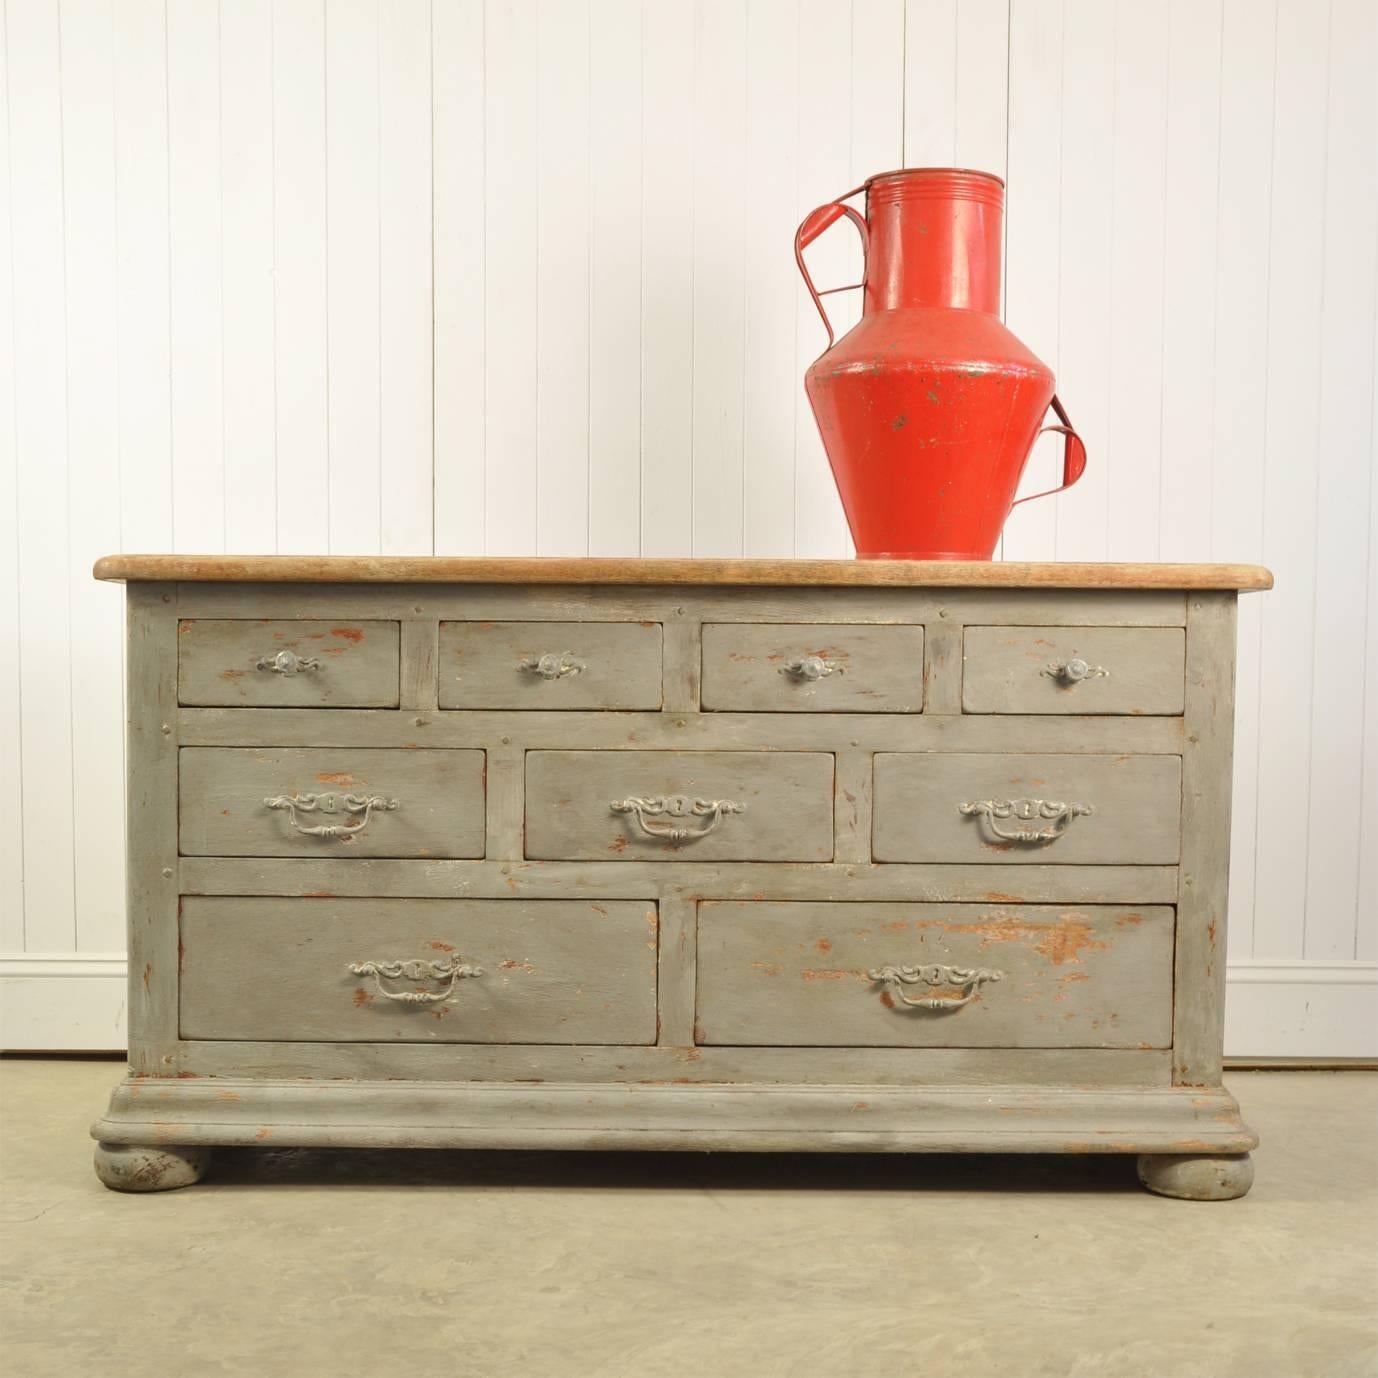 This vintage chest of drawers is circa 1950s and it is very well made out of oak. 

The top is in its original sun bleached condition, whereas the body has been repainted in a French Grey - still retaining plenty of character.  The drawers have